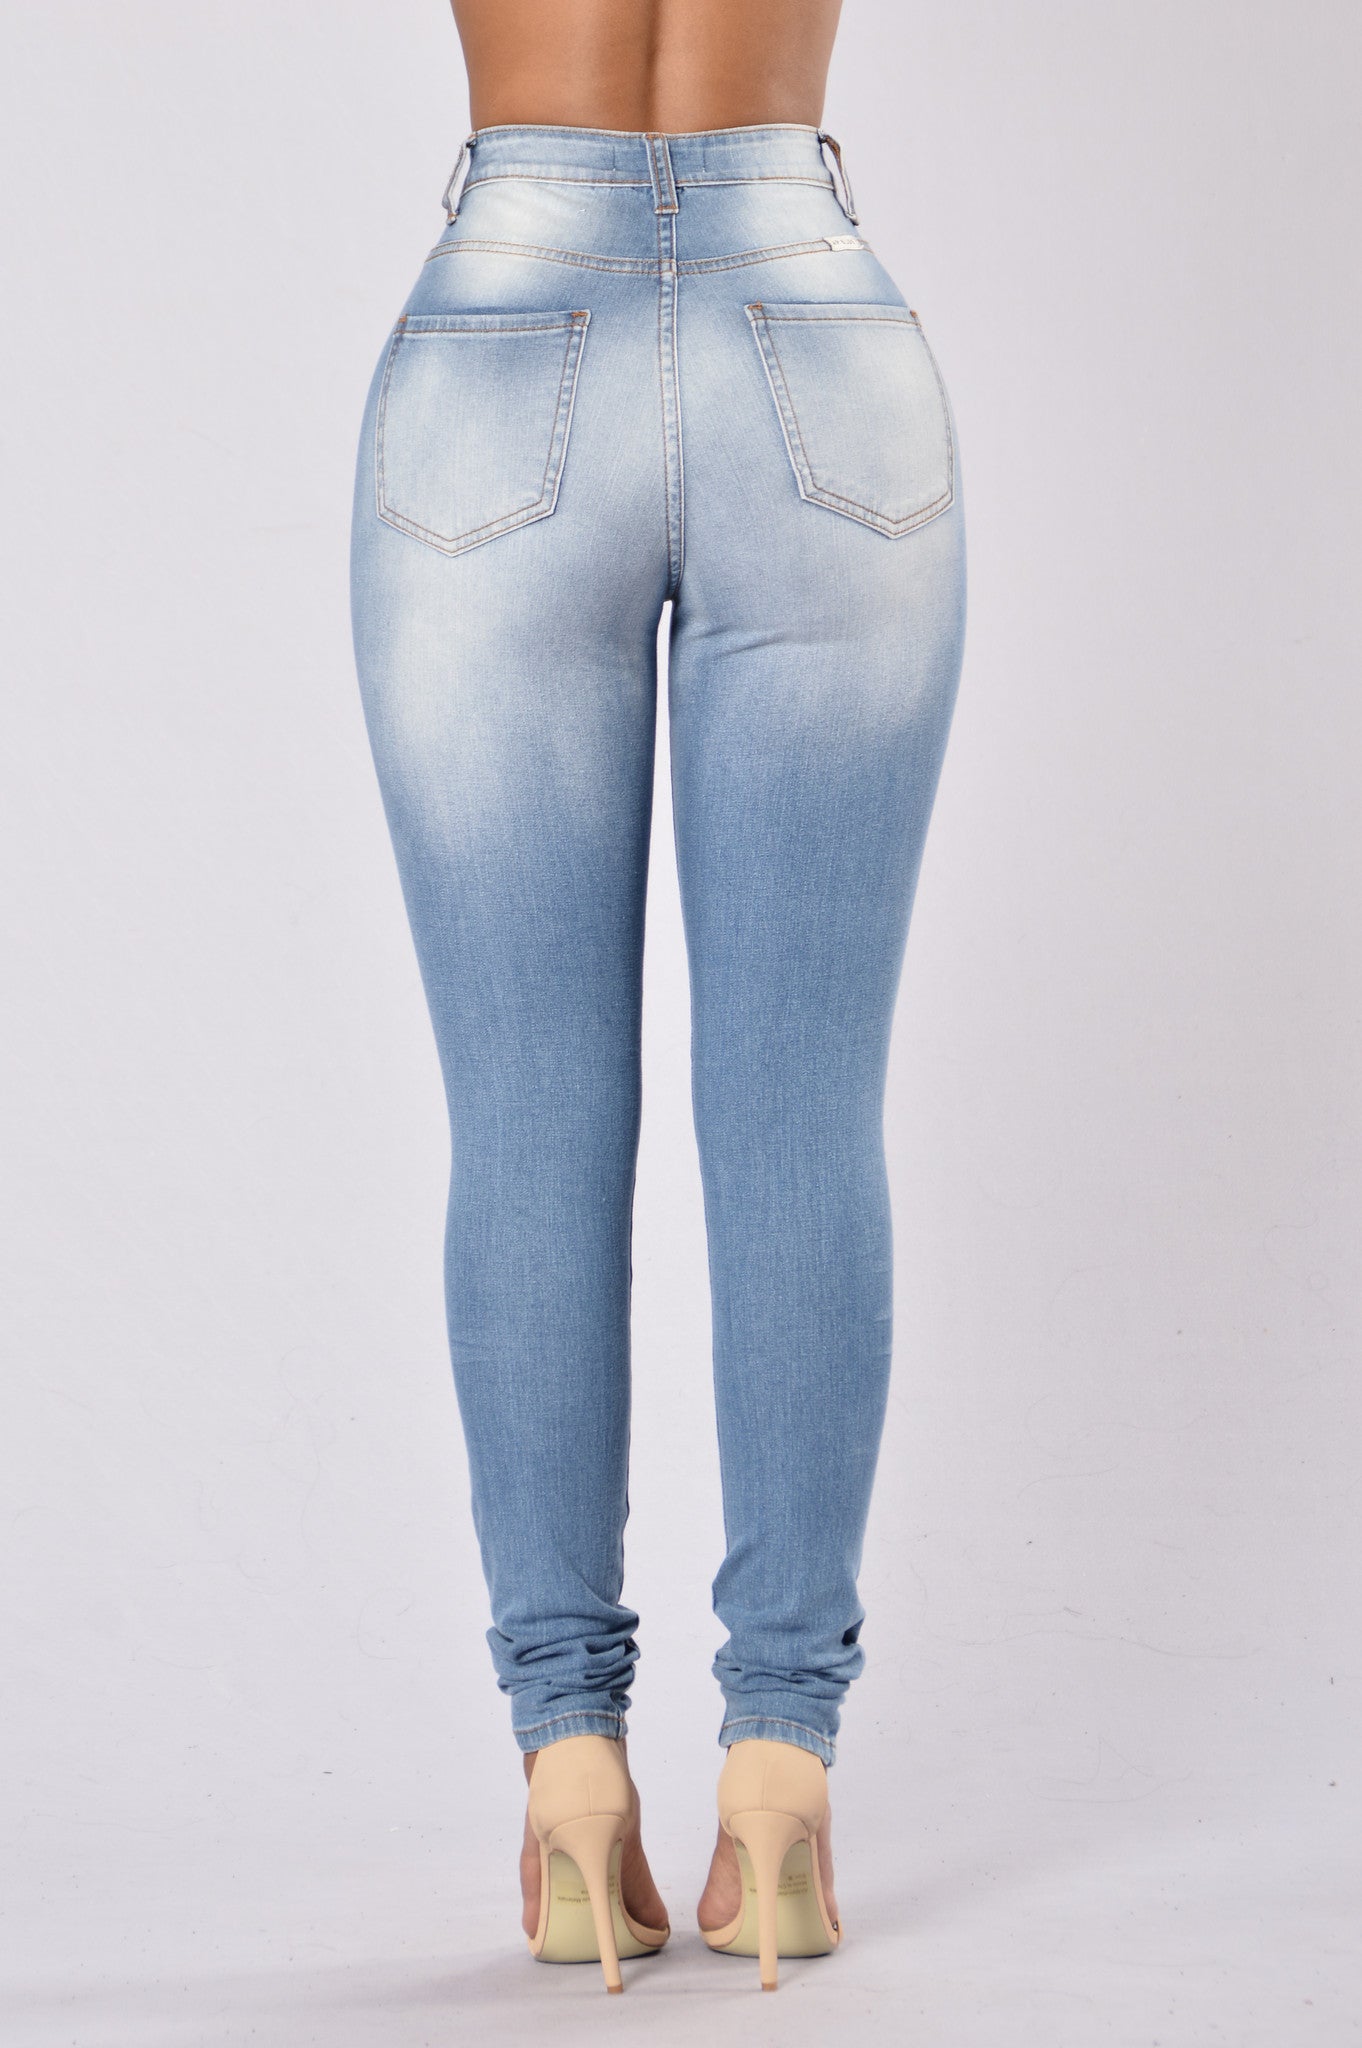 Tag You're It Jeans - Medium Blue